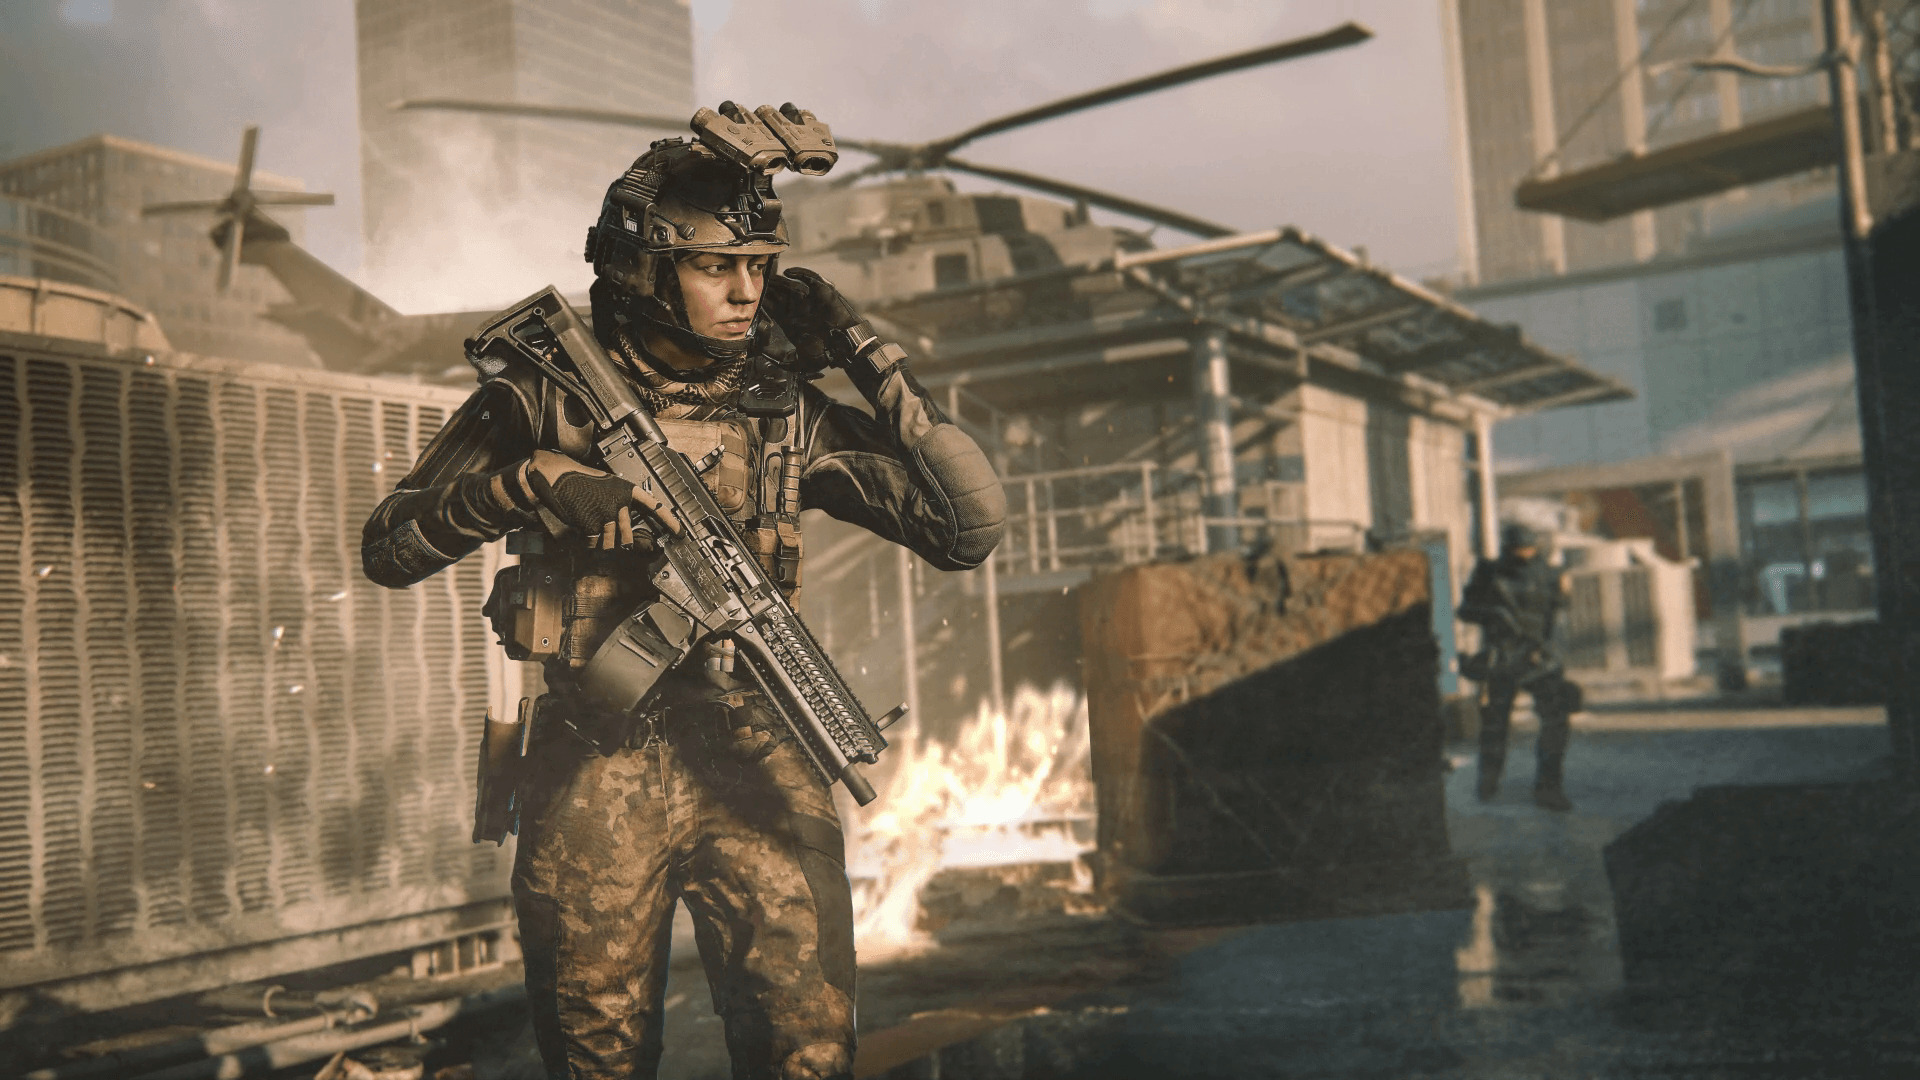 Call Of Duty's Most Iconic Map Will Be Available In The Modern Warfare 3  Beta